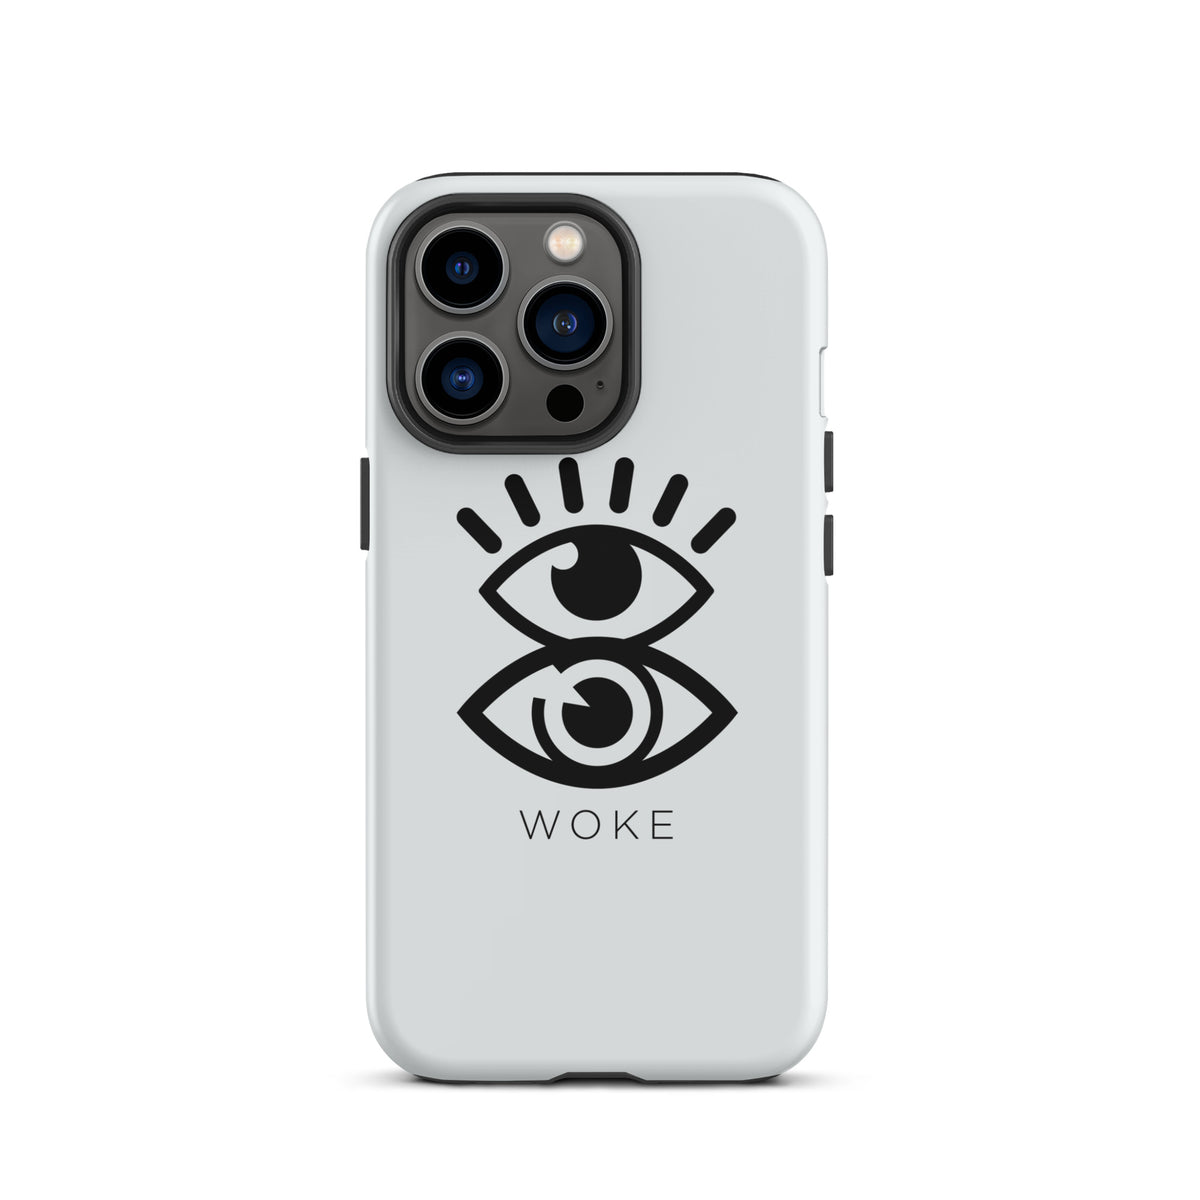 White iphone case with an open eye